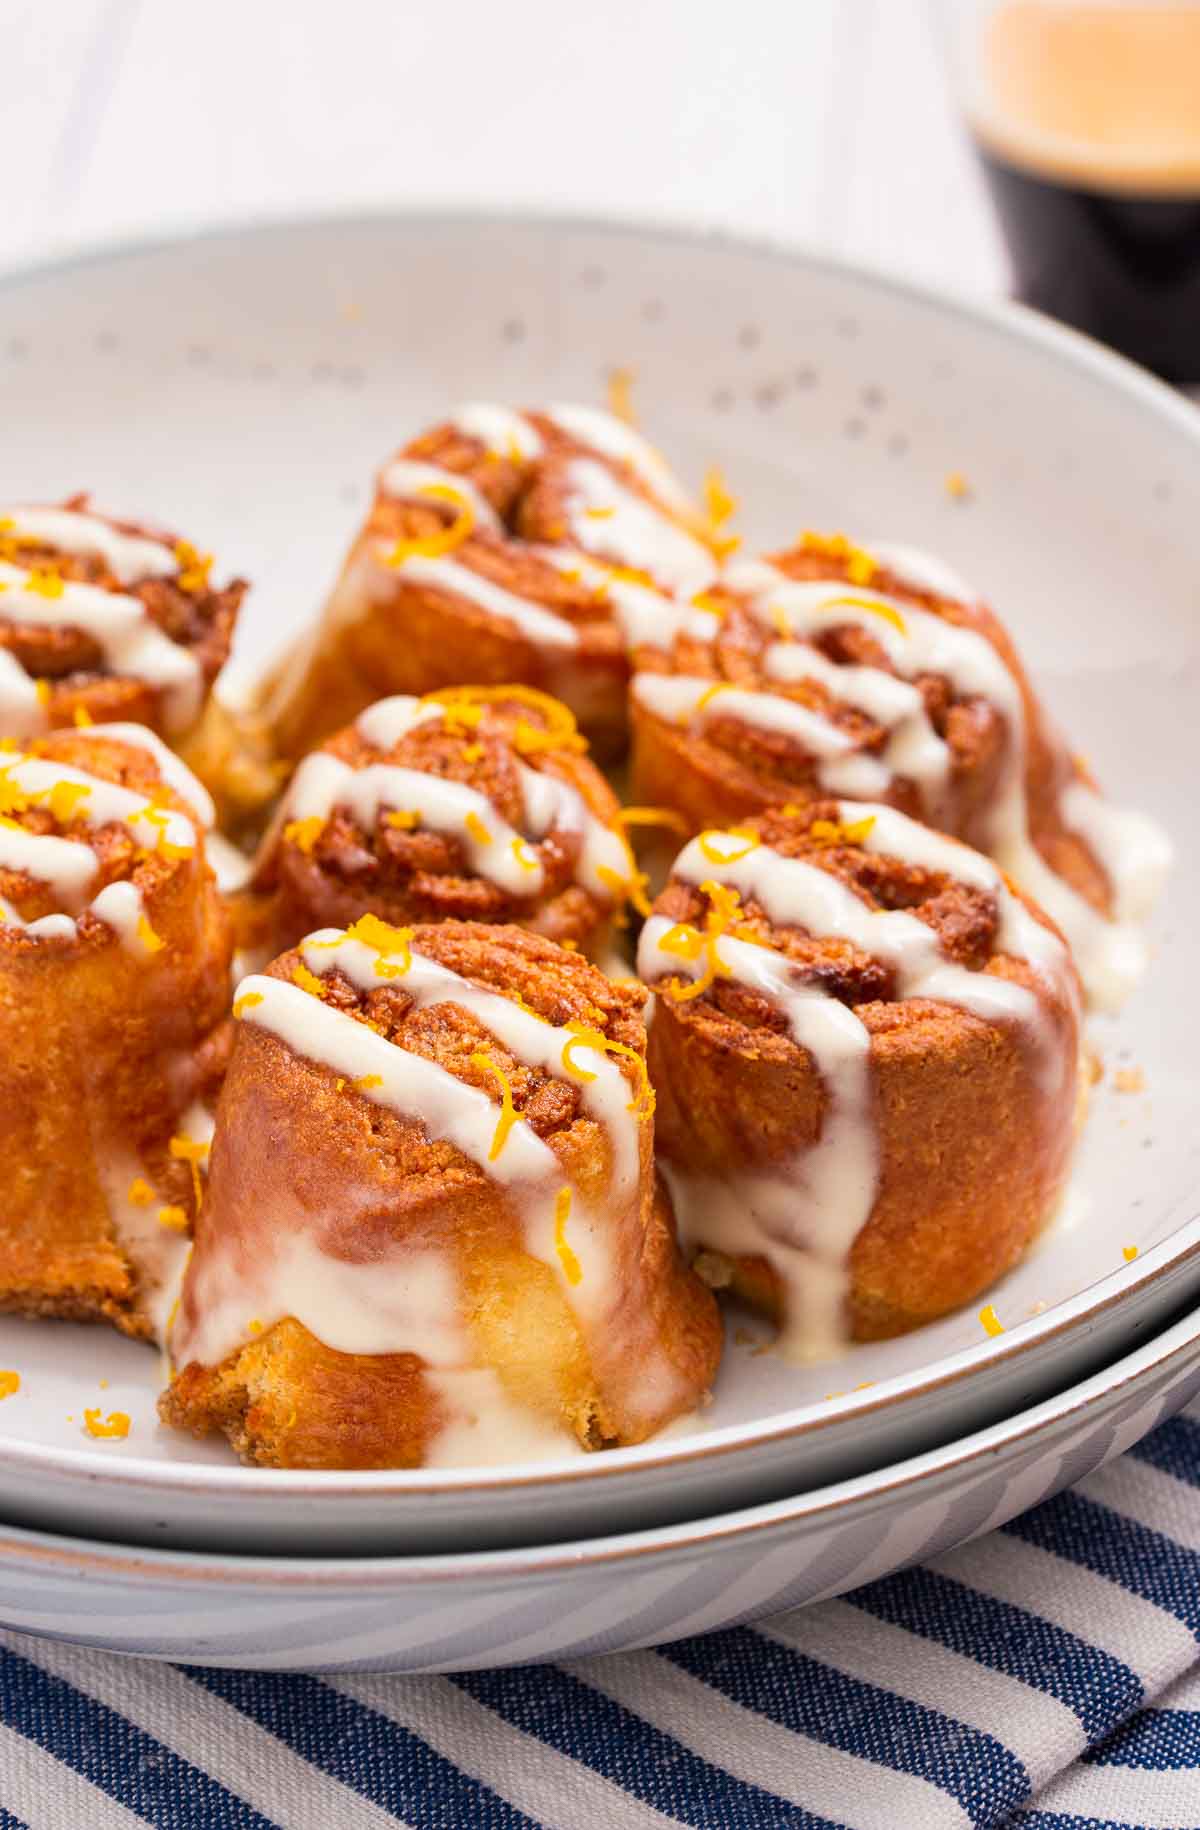 Low carb air fryer cinnamon rolls with a cream cheese glaze on a white plate.